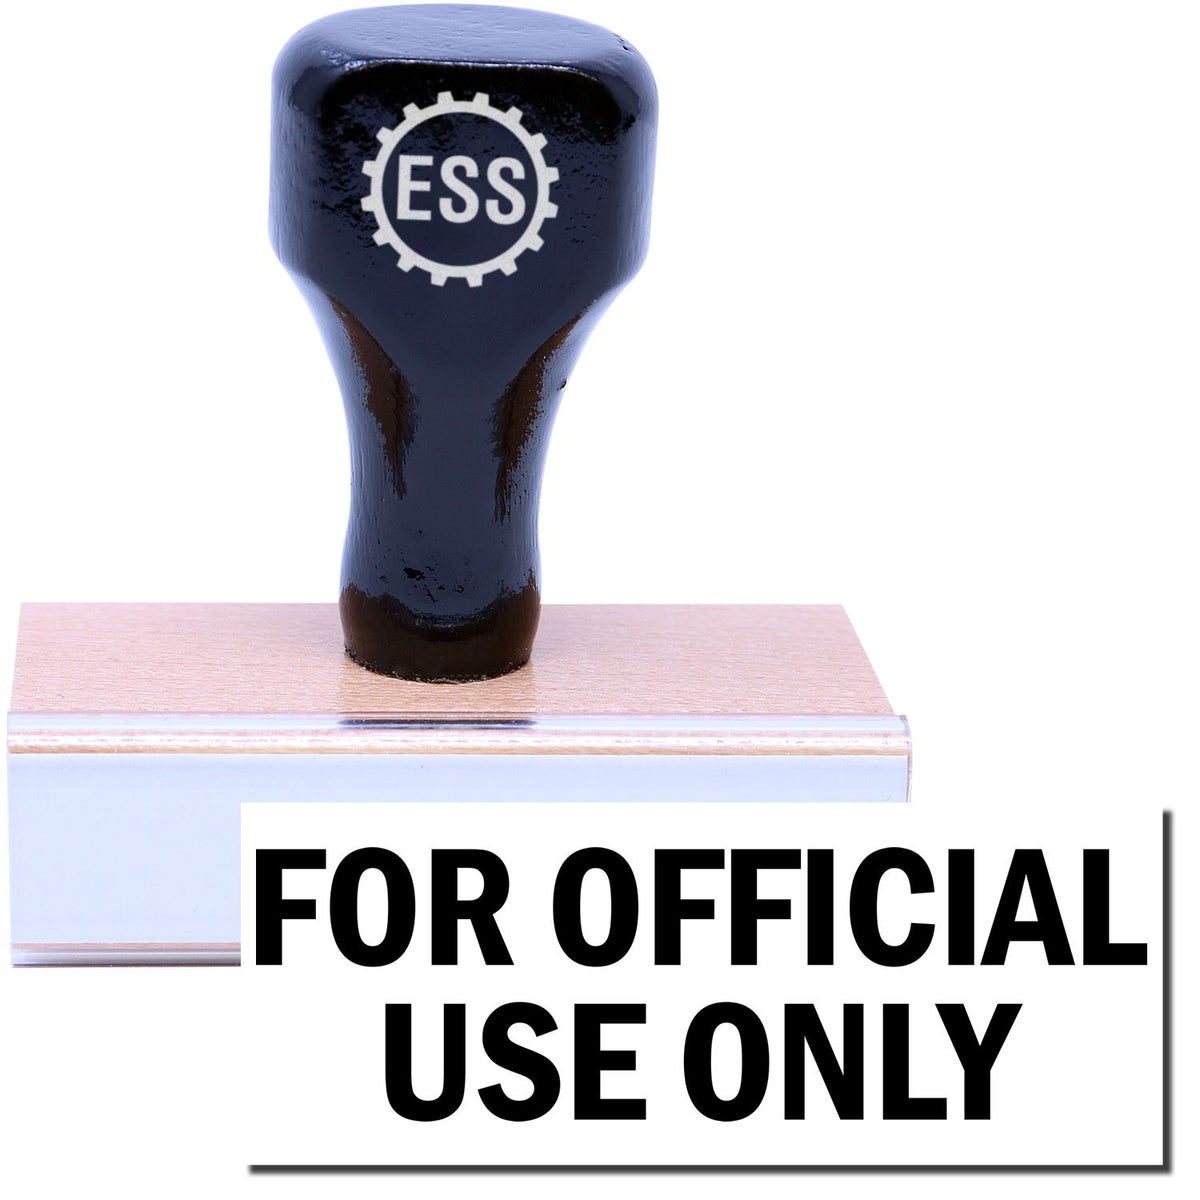 A stock office rubber stamp with a stamped image showing how the text &quot;FOR OFFICIAL USE ONLY&quot; in a large font is displayed after stamping.